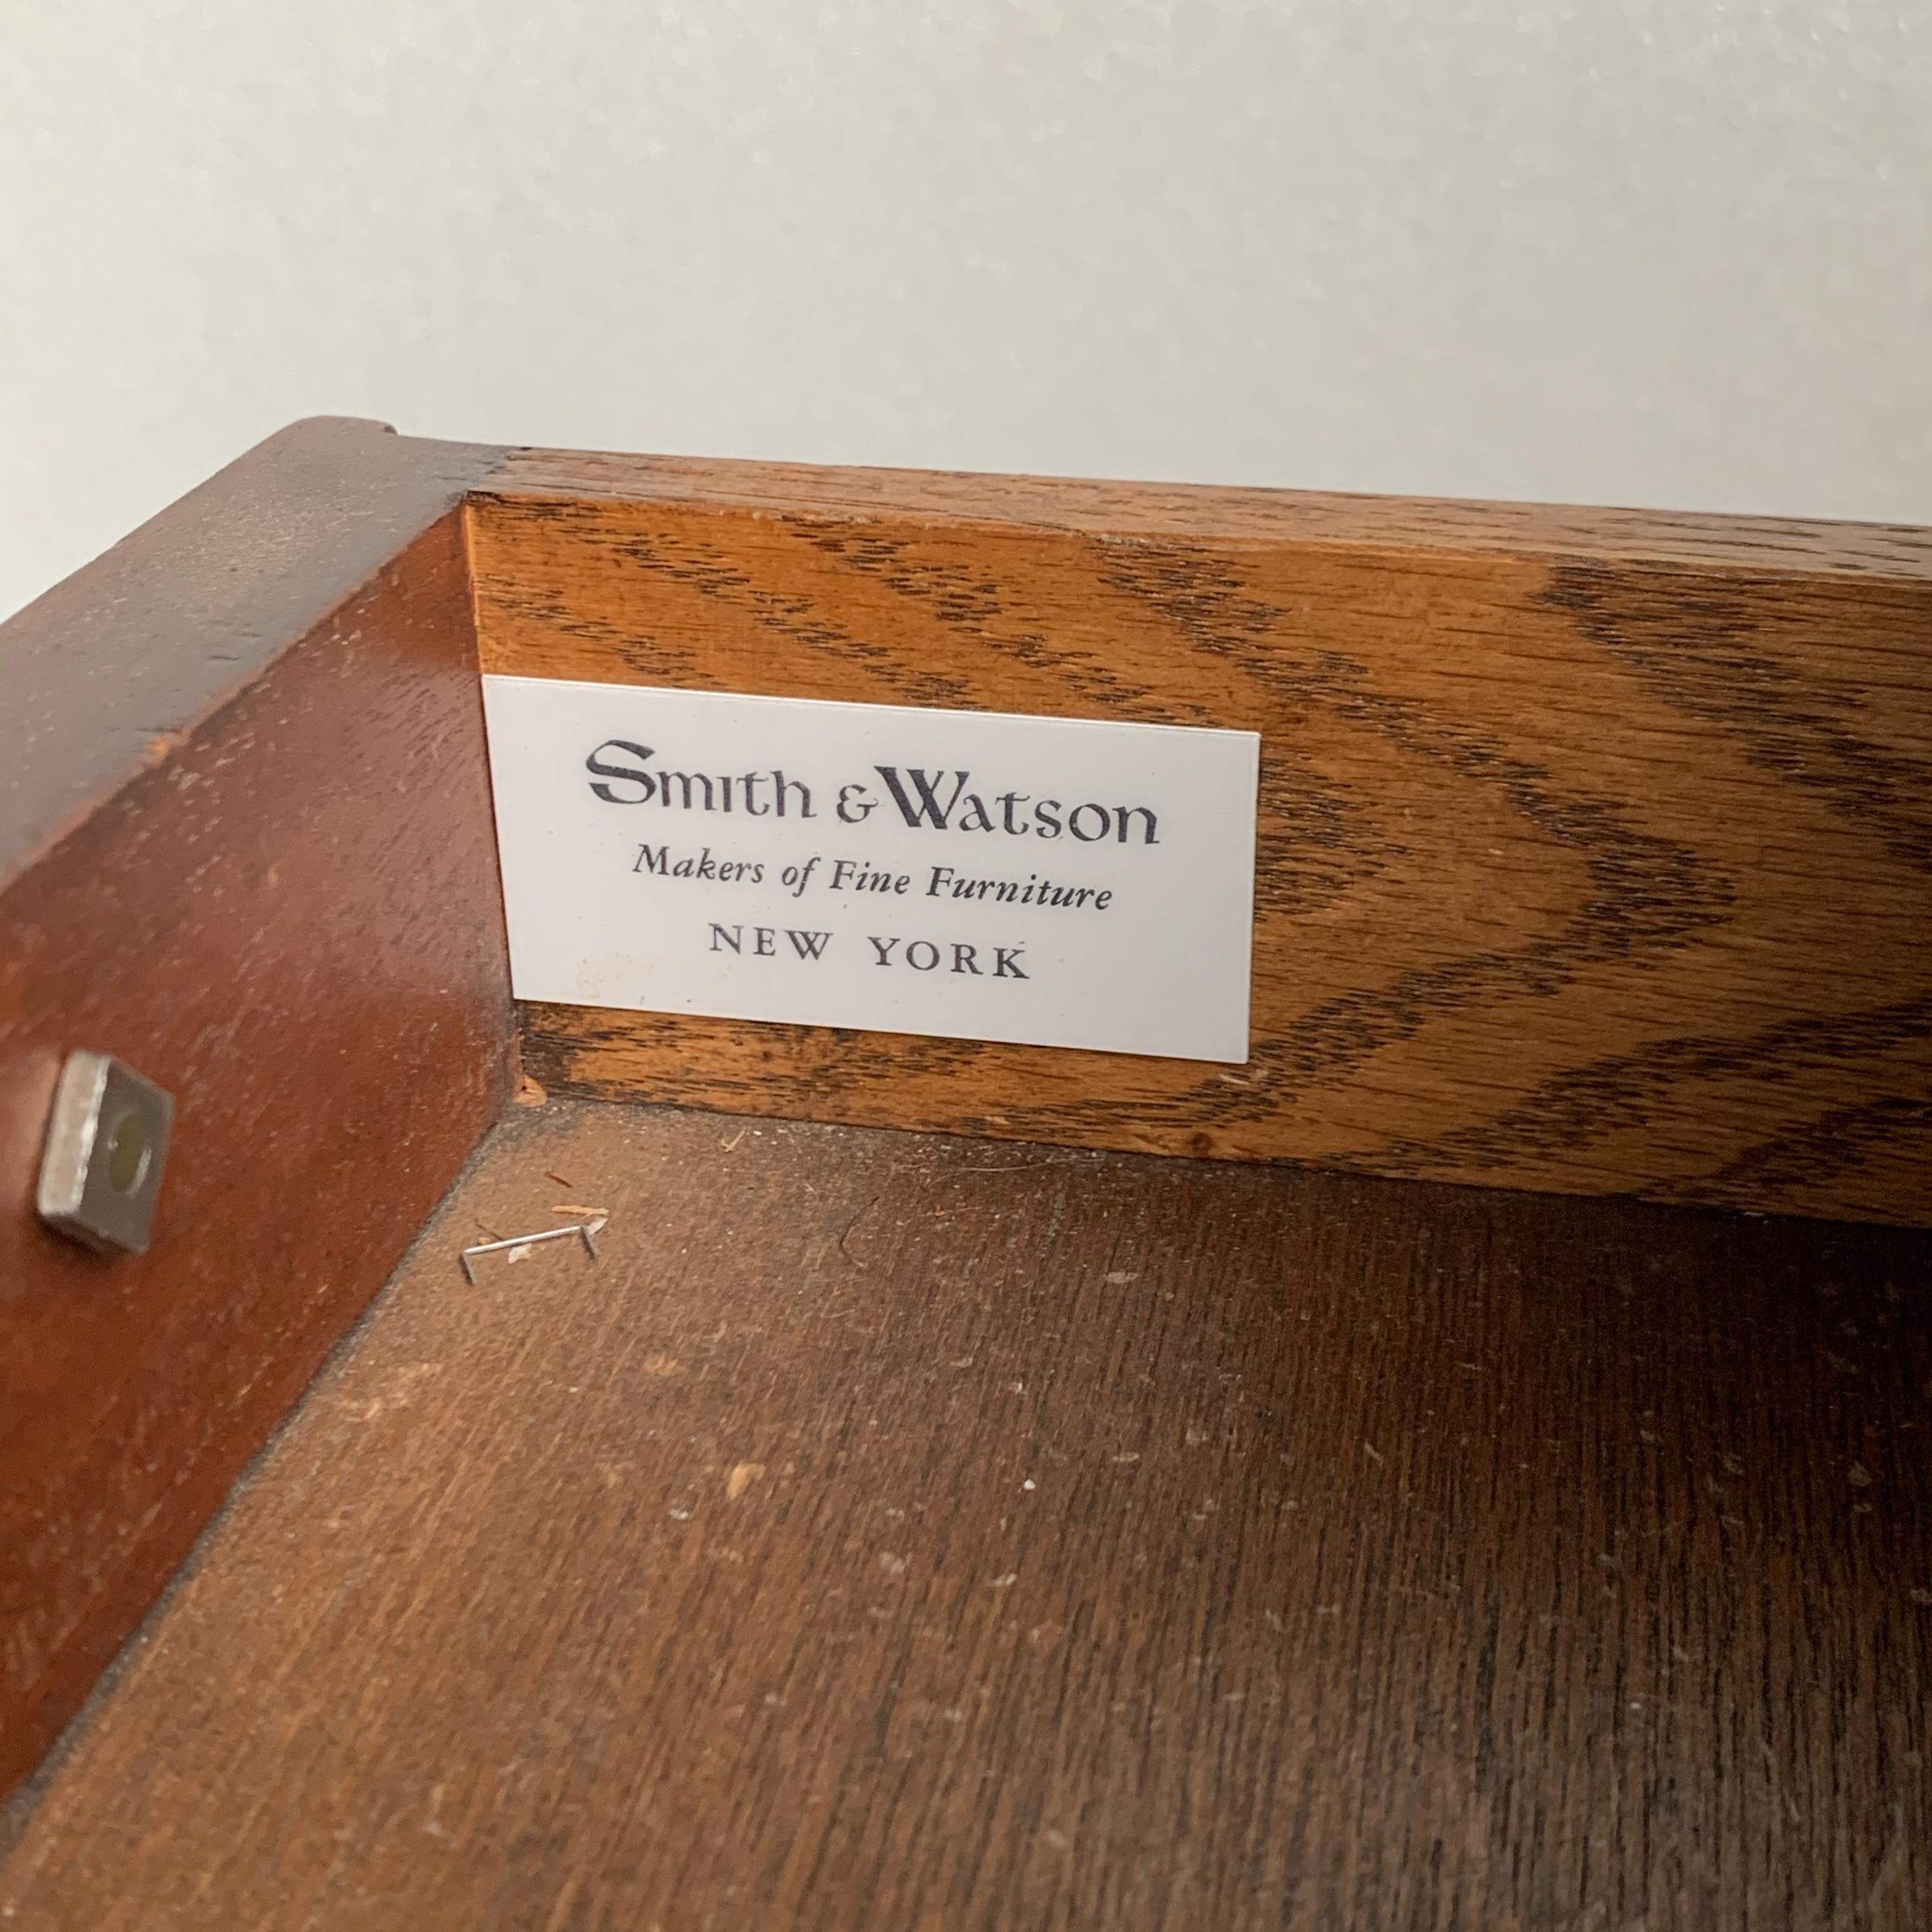 20th Century Small Georgian Style Bedside Cabinet By Smith & Watson, New York